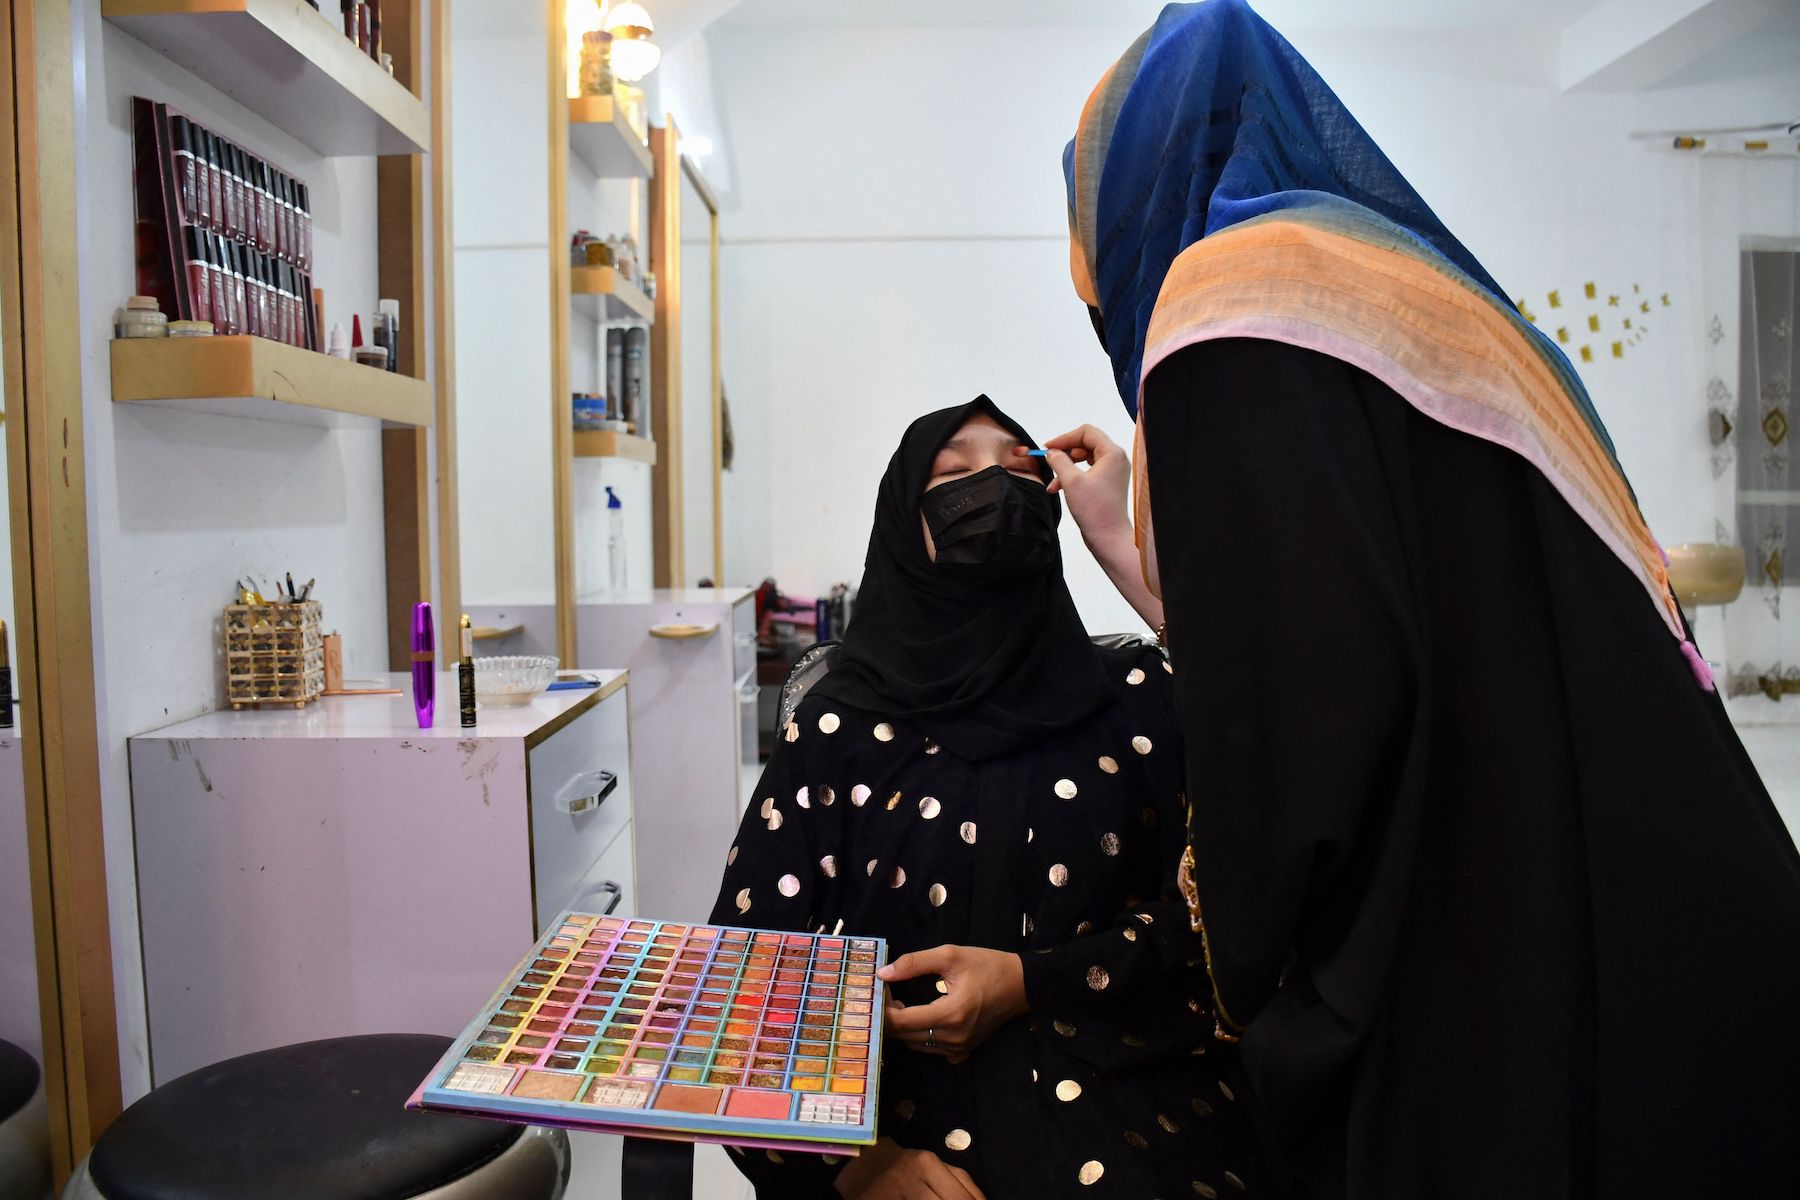 Women In Afghanistan Held A Rare Protest Against The Taliban Banning Beauty Salons